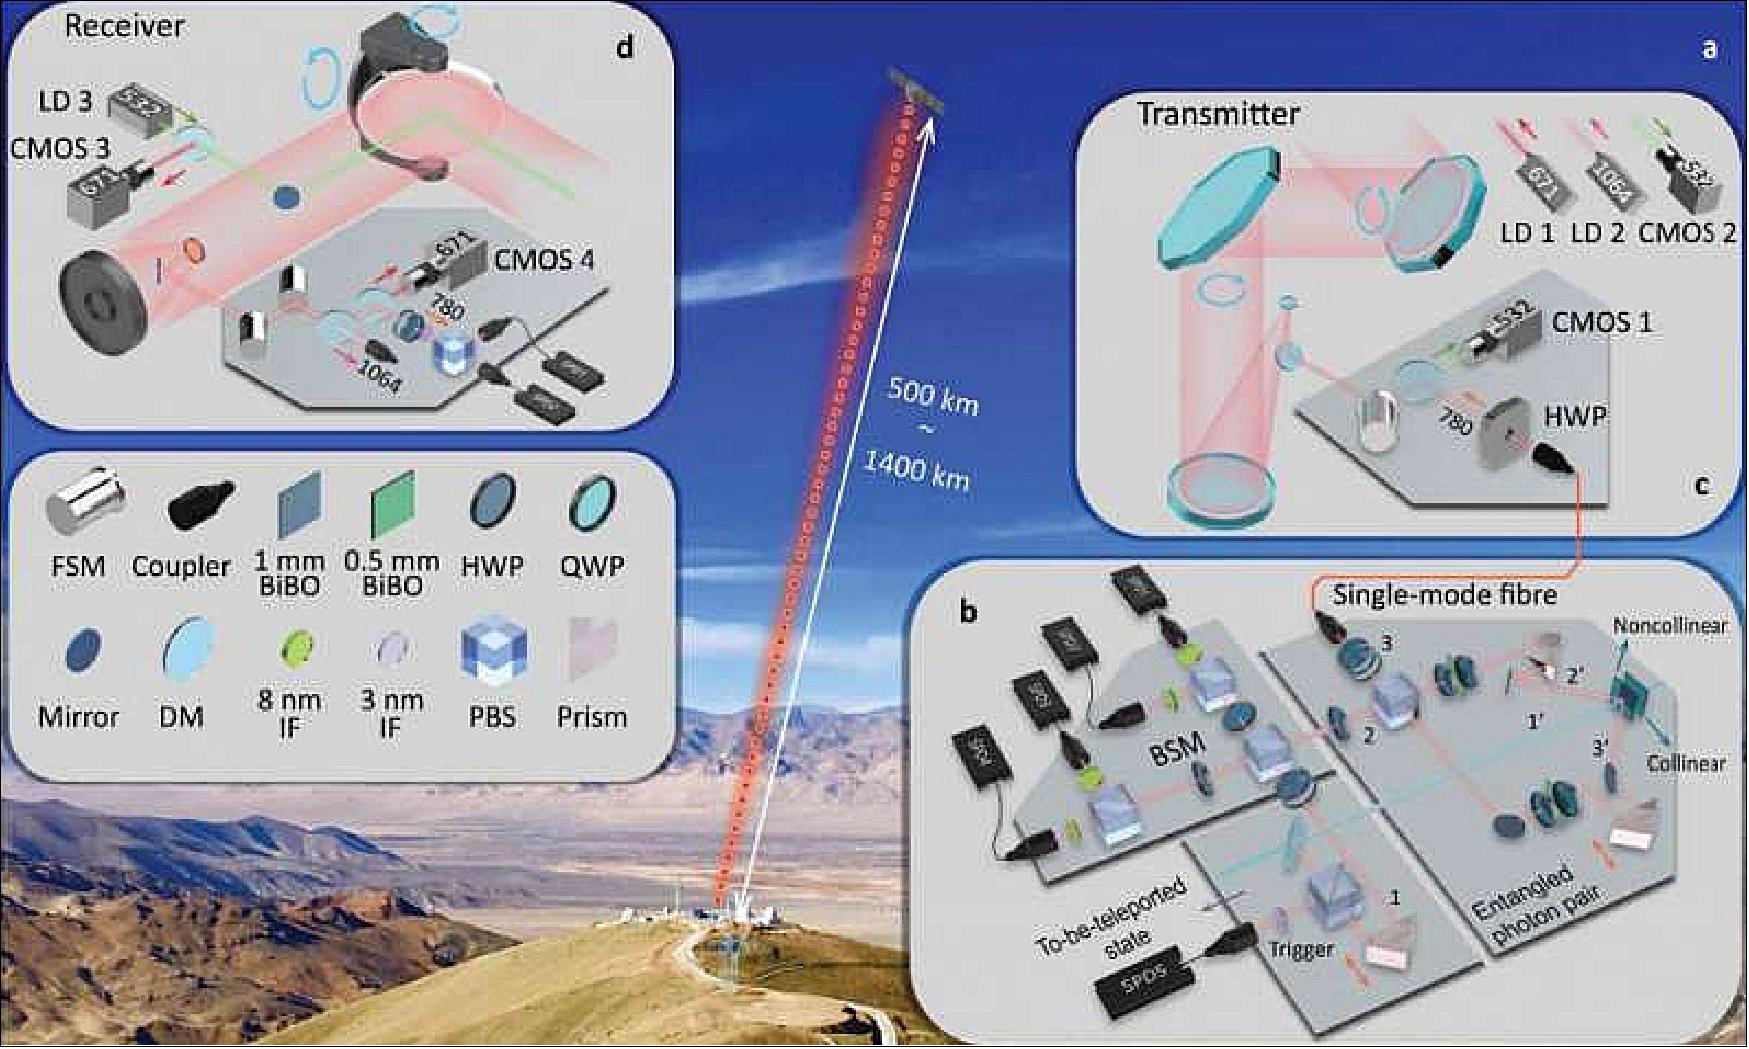 Figure 8: Overview of the set-up for ground-to-satellite quantum teleportation of a single photon with a distance up to 1400 km (image credit: Chinese QUESS Research Team, Ref. 14)